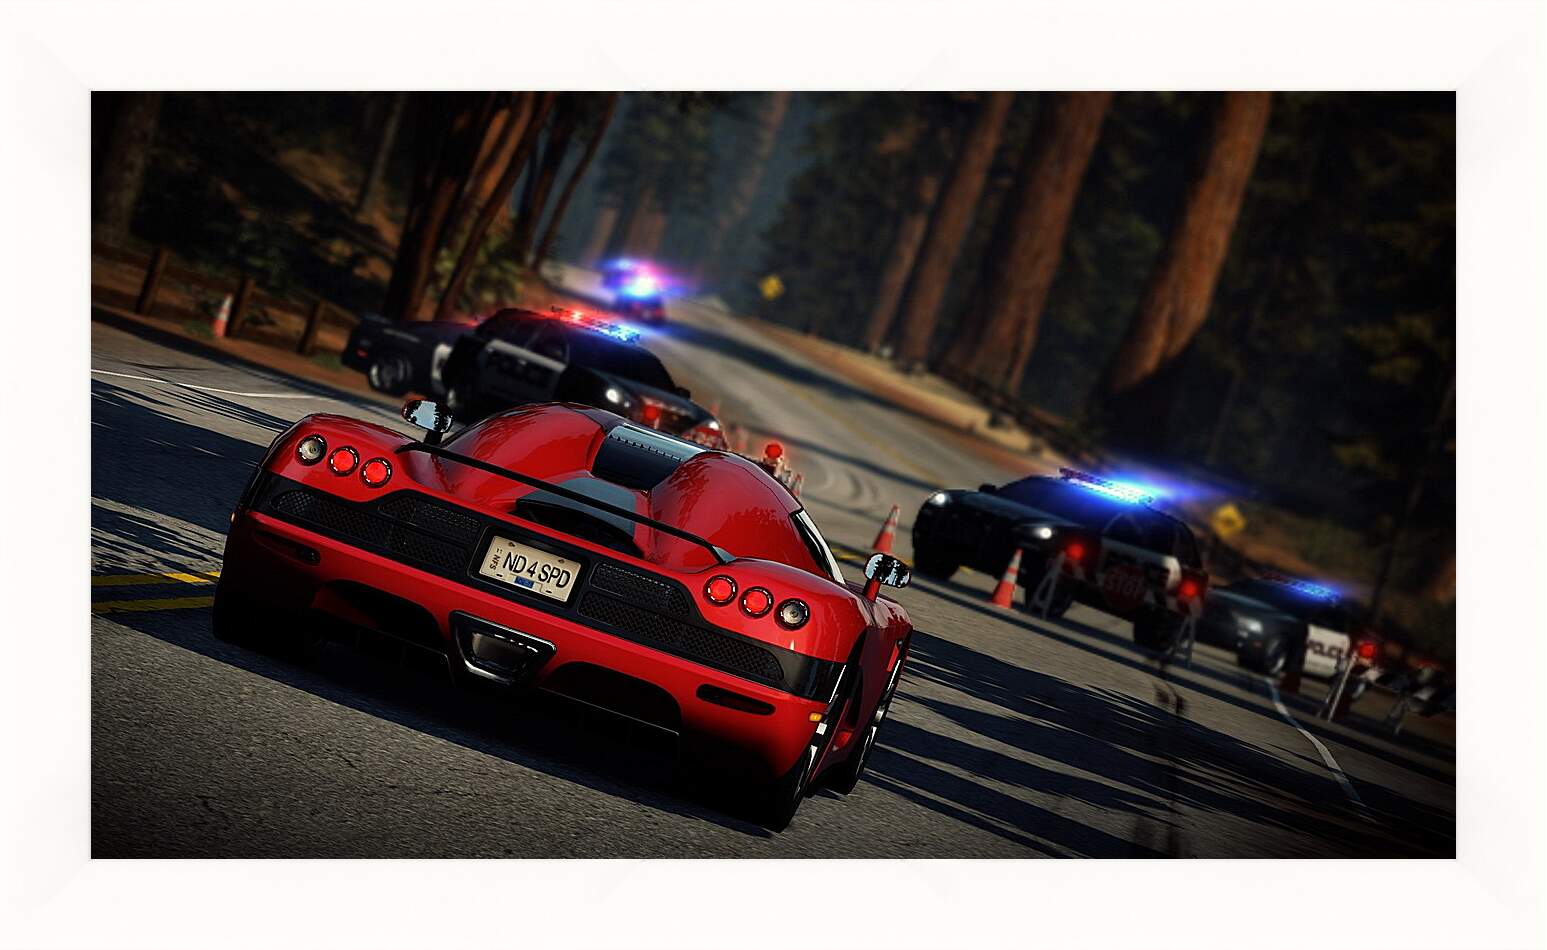 Картина в раме - nfs, need for speed, car
